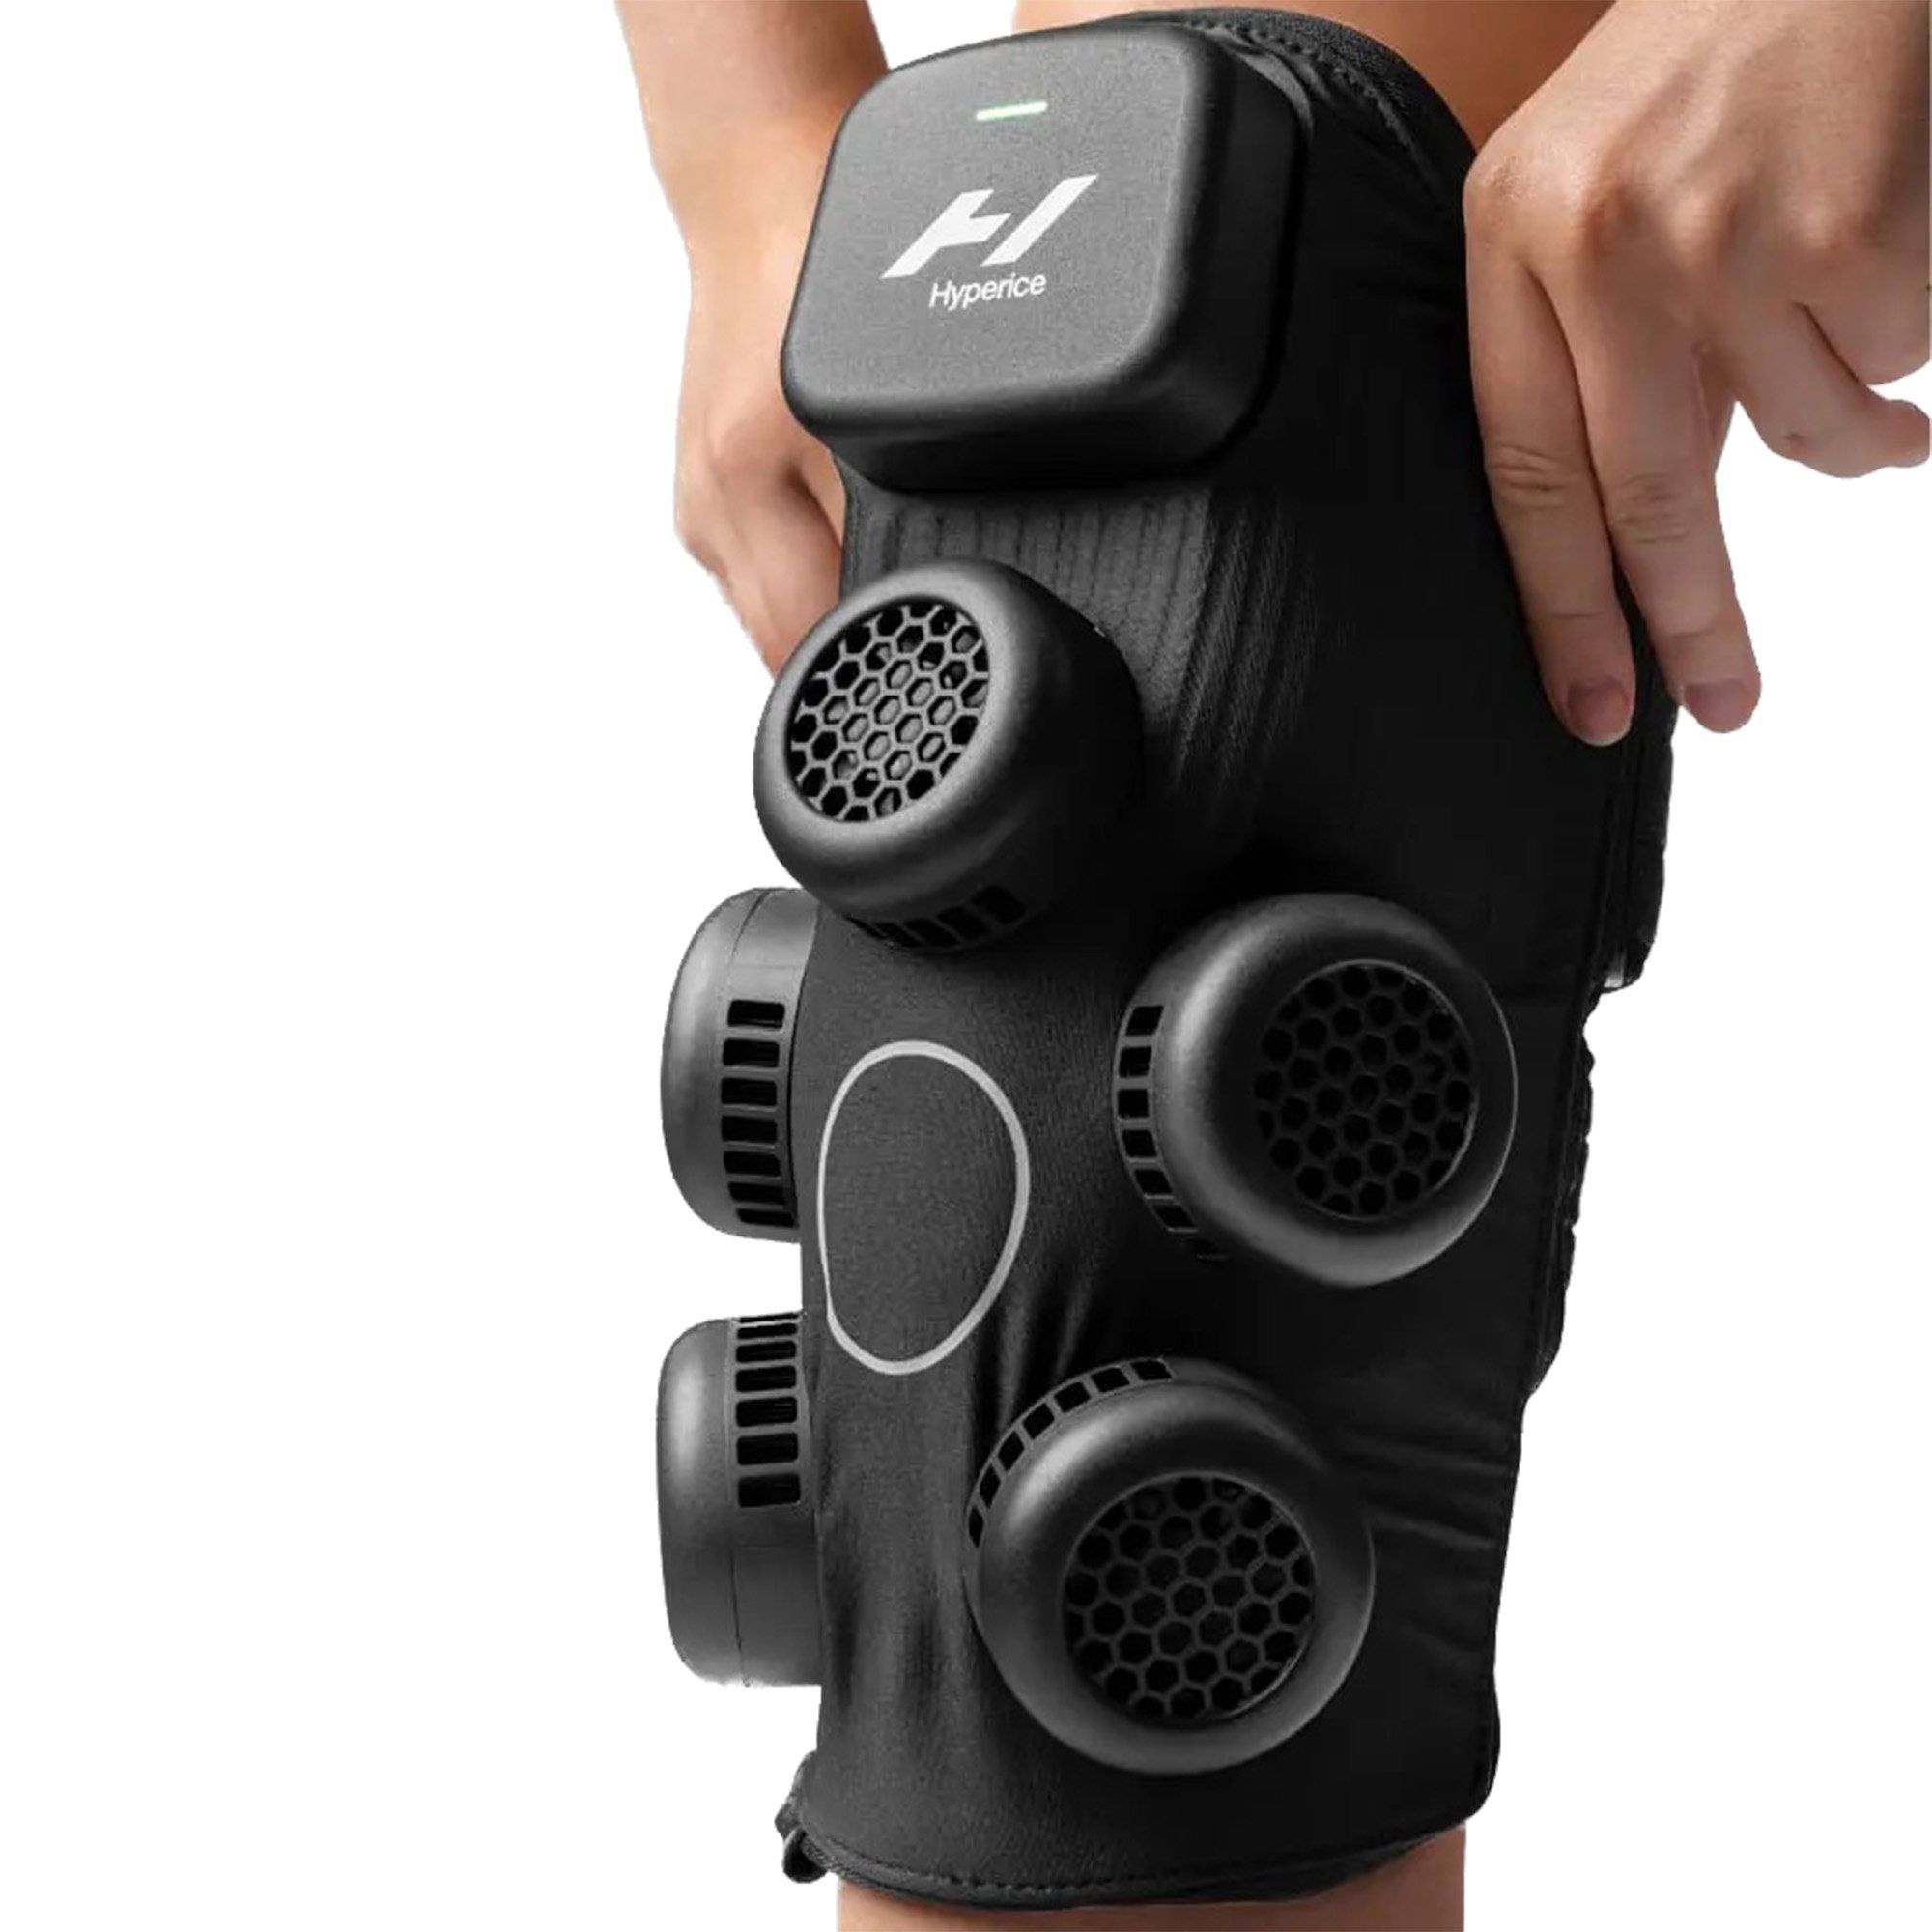 Hyperice X Knee Hot & Cold Therapy, One Size Fits Most - Black 